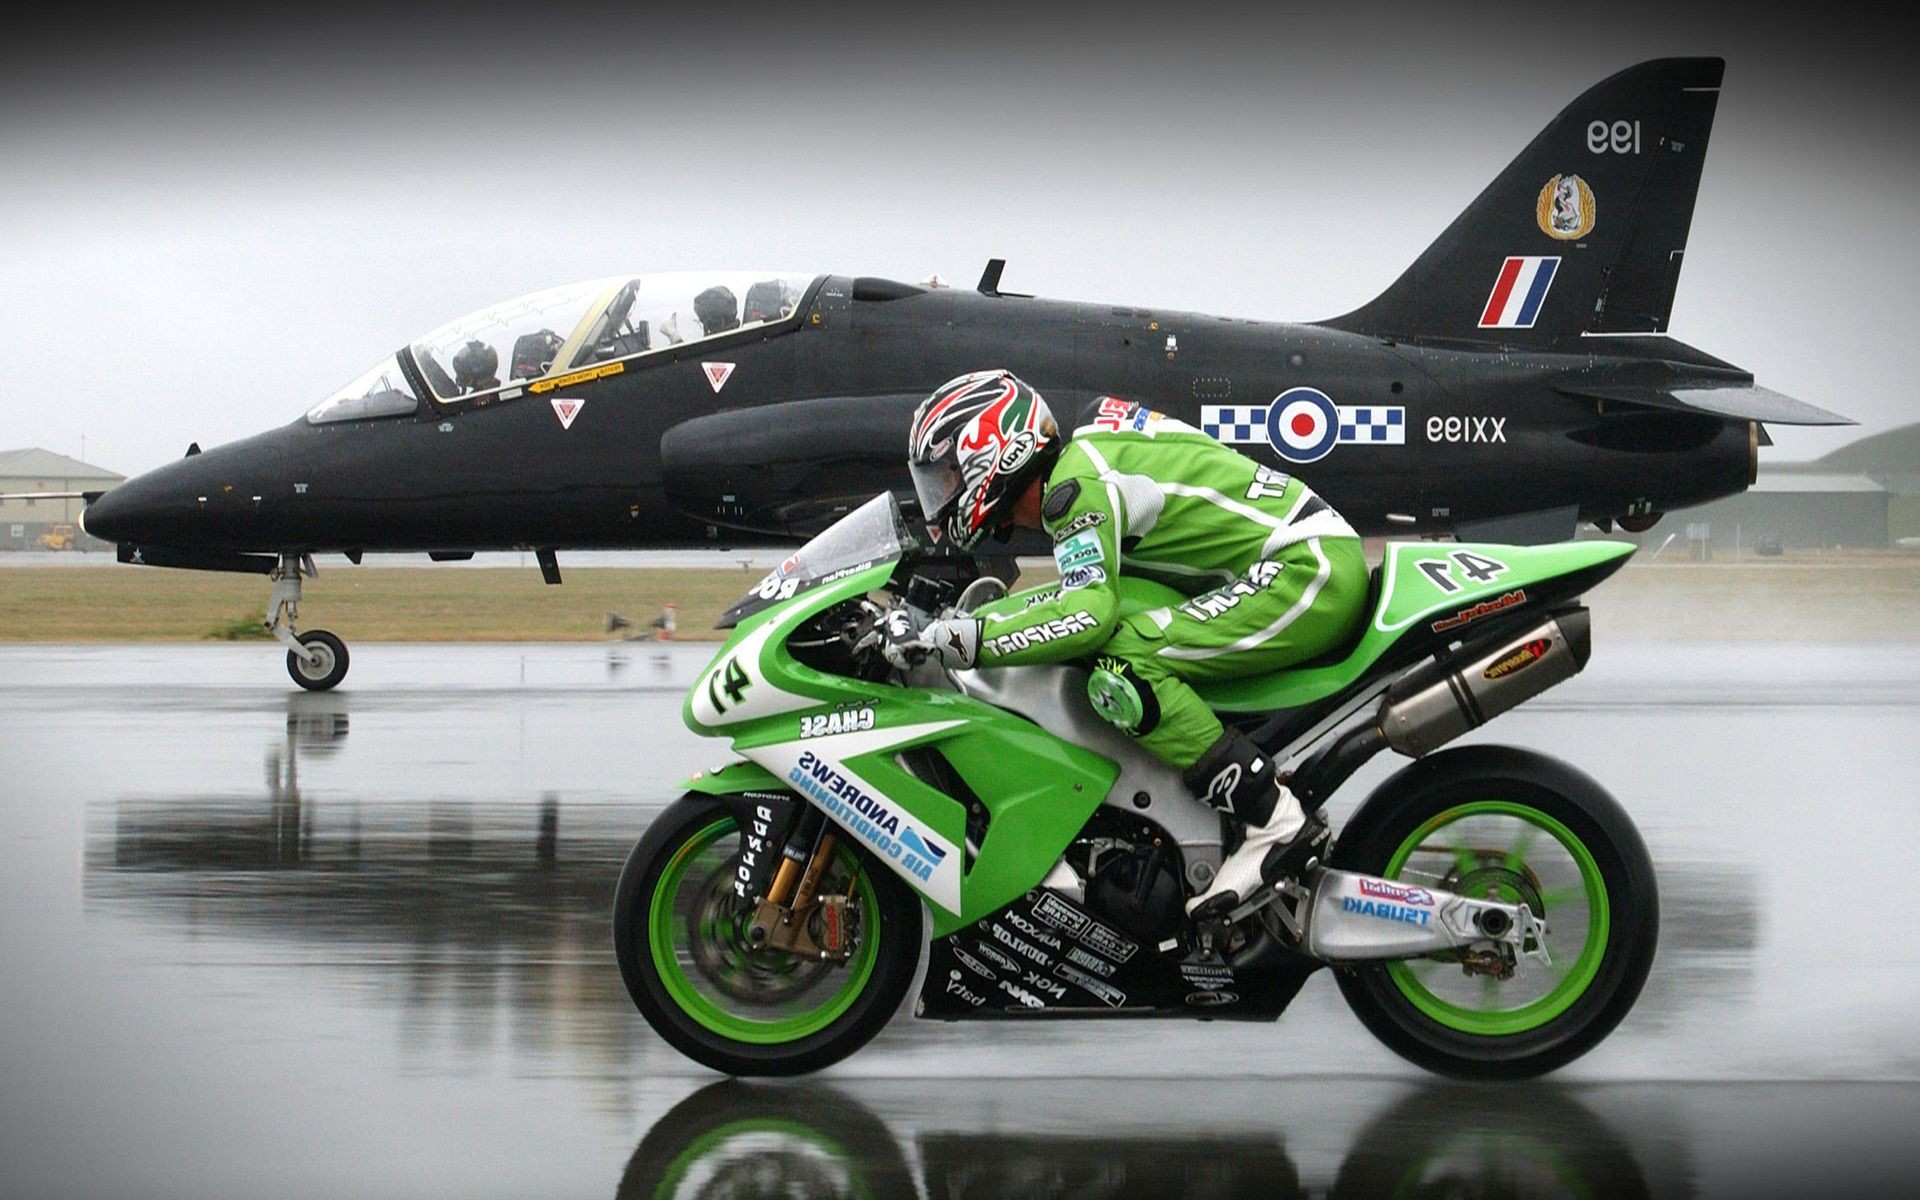 sport bike race vehicle competition auto racing bike action transportation system track championship fly fast